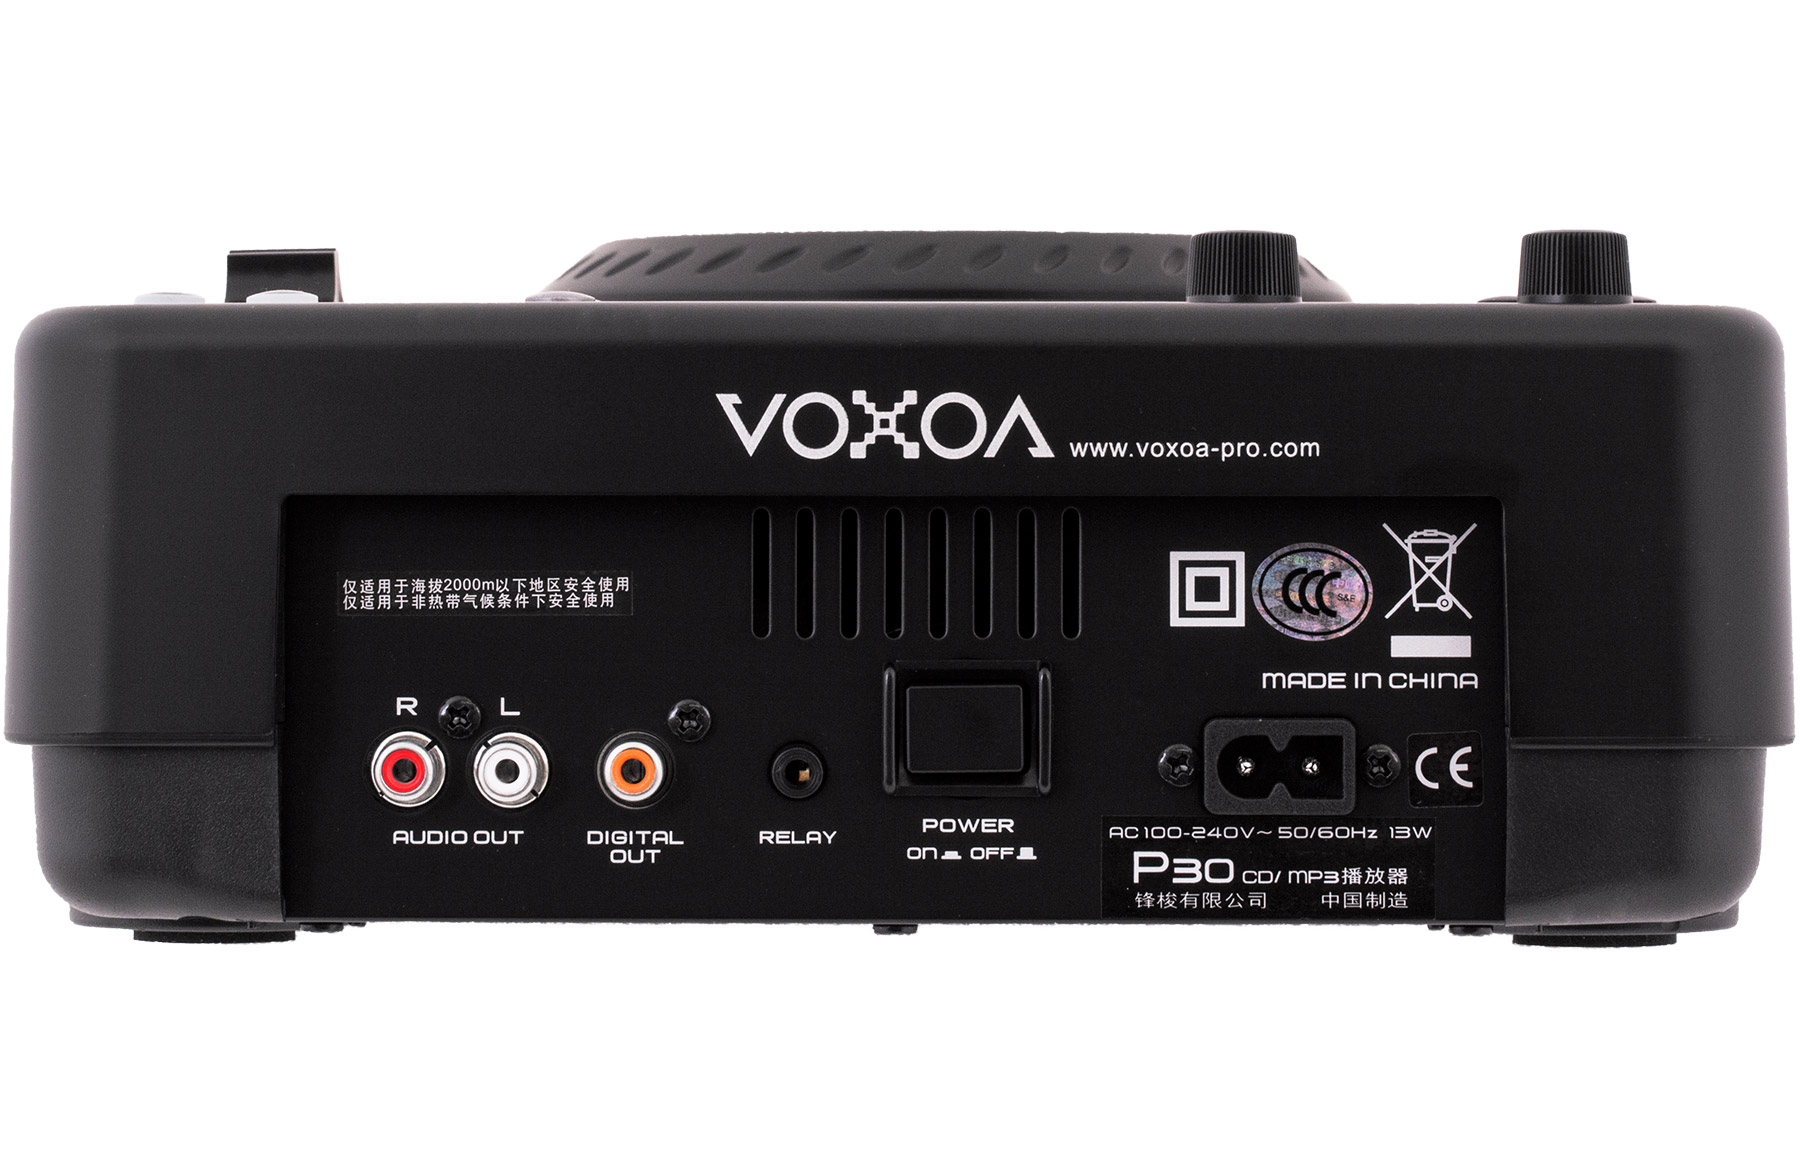 VOXOA P30 MEDIA PLAYER MP3 CDR 2